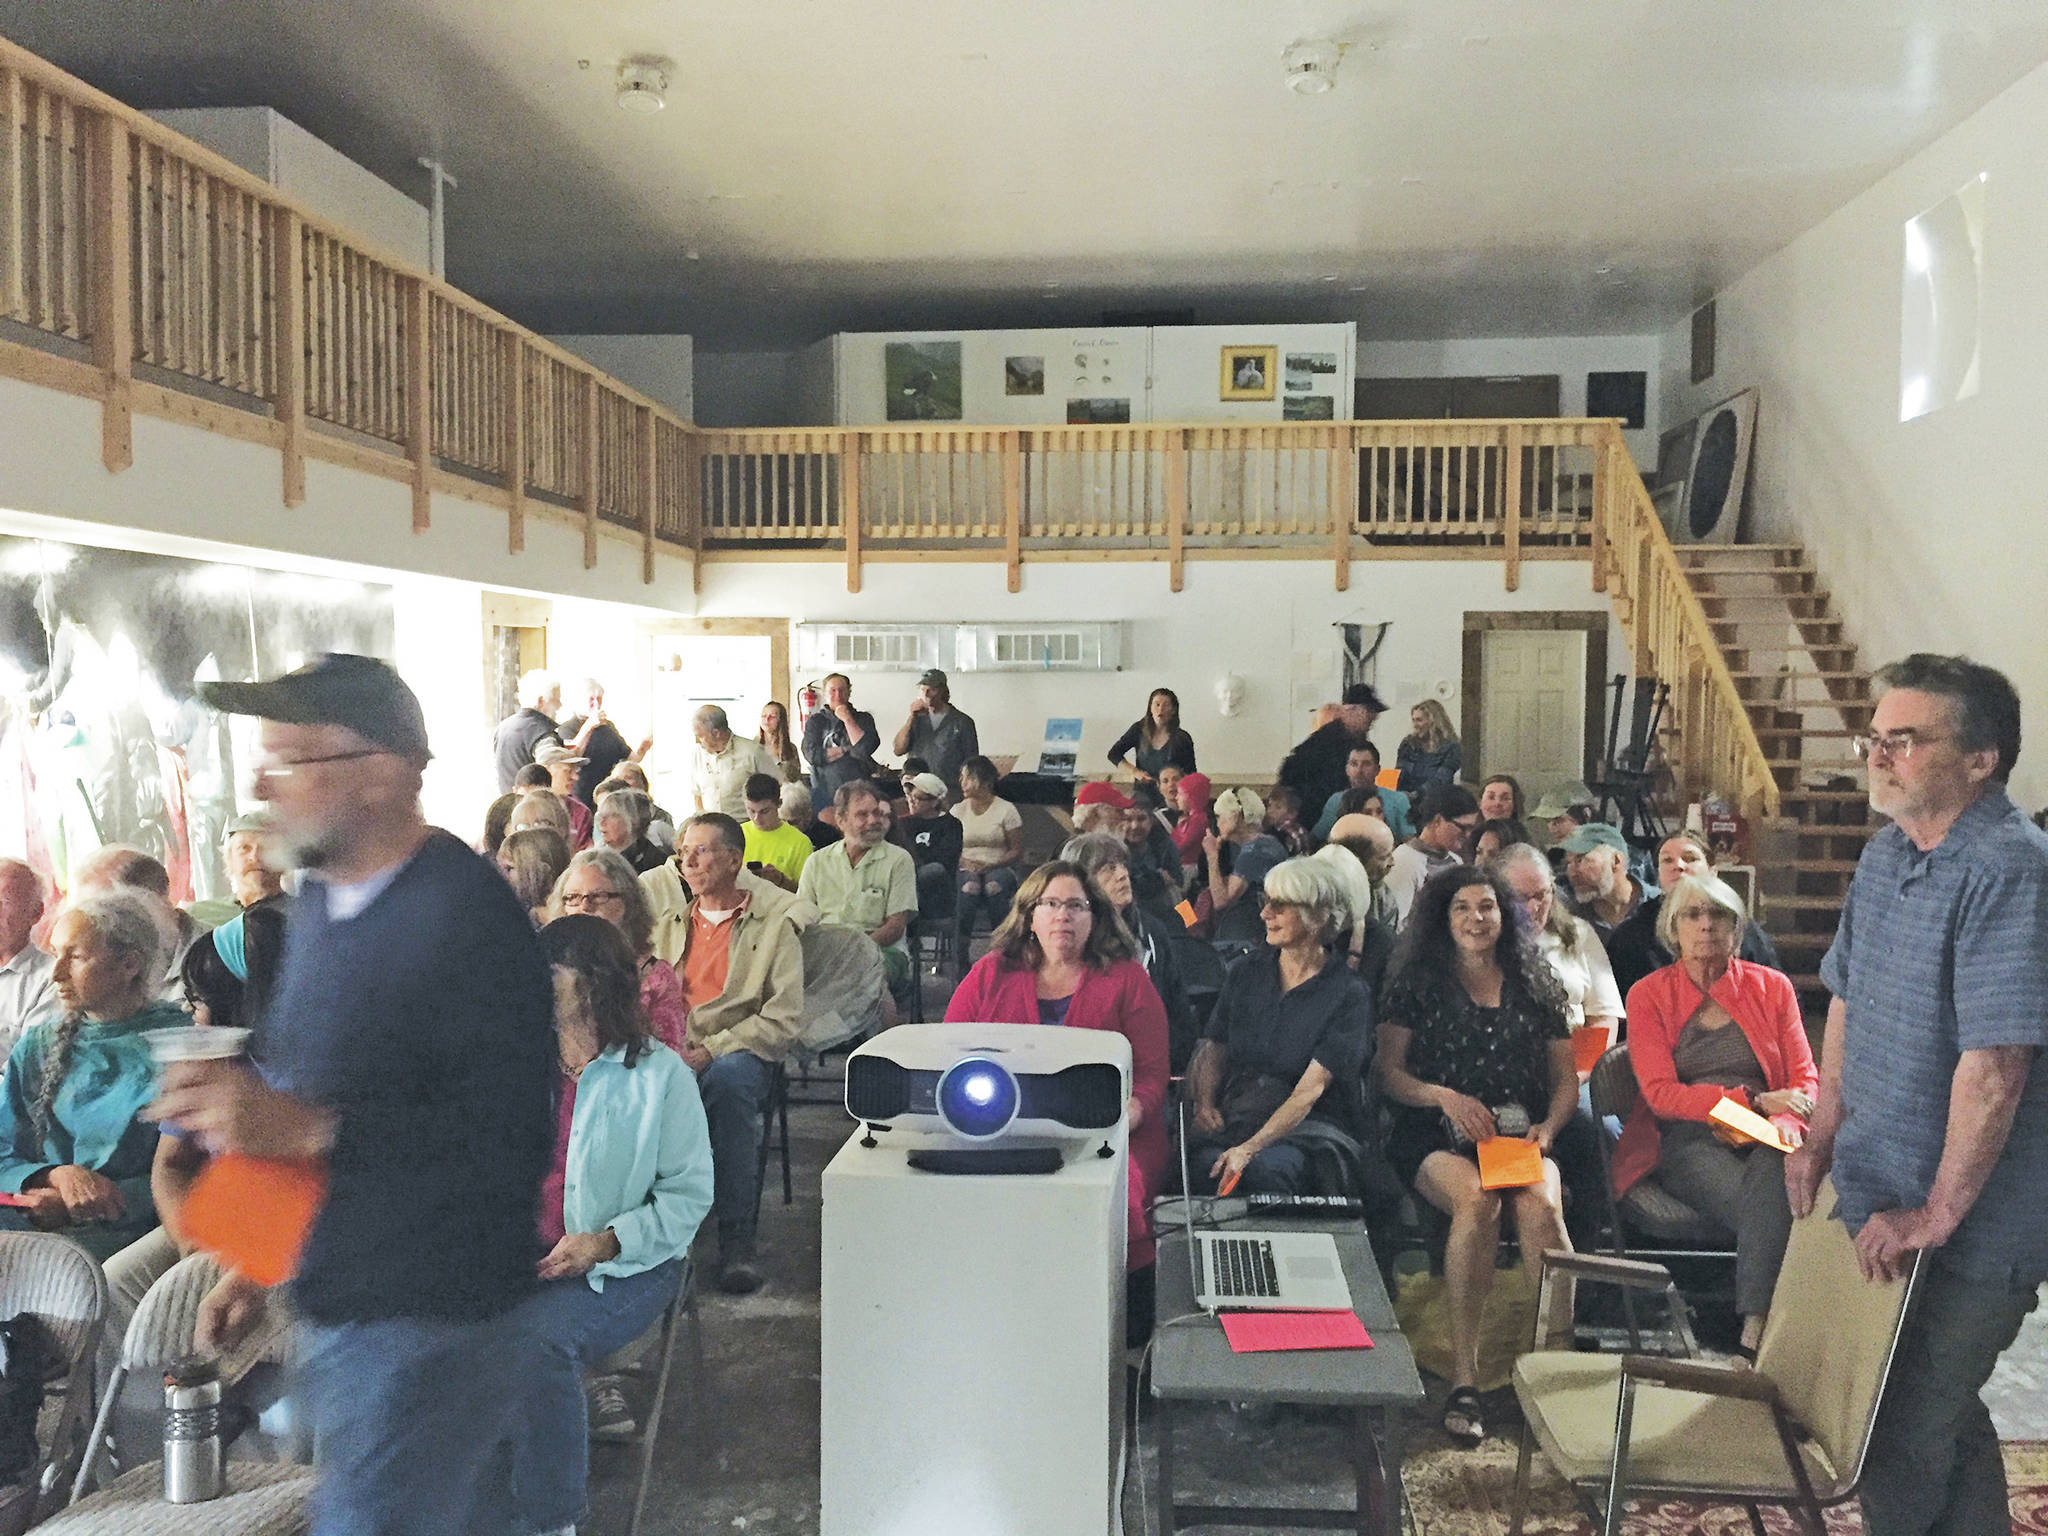 The audience waits for the start of a PechaKucha 20x20 presentation on July 25, 2019, at The Shop in Kachemak City, Alaska. (Photo by Brianna Allen)